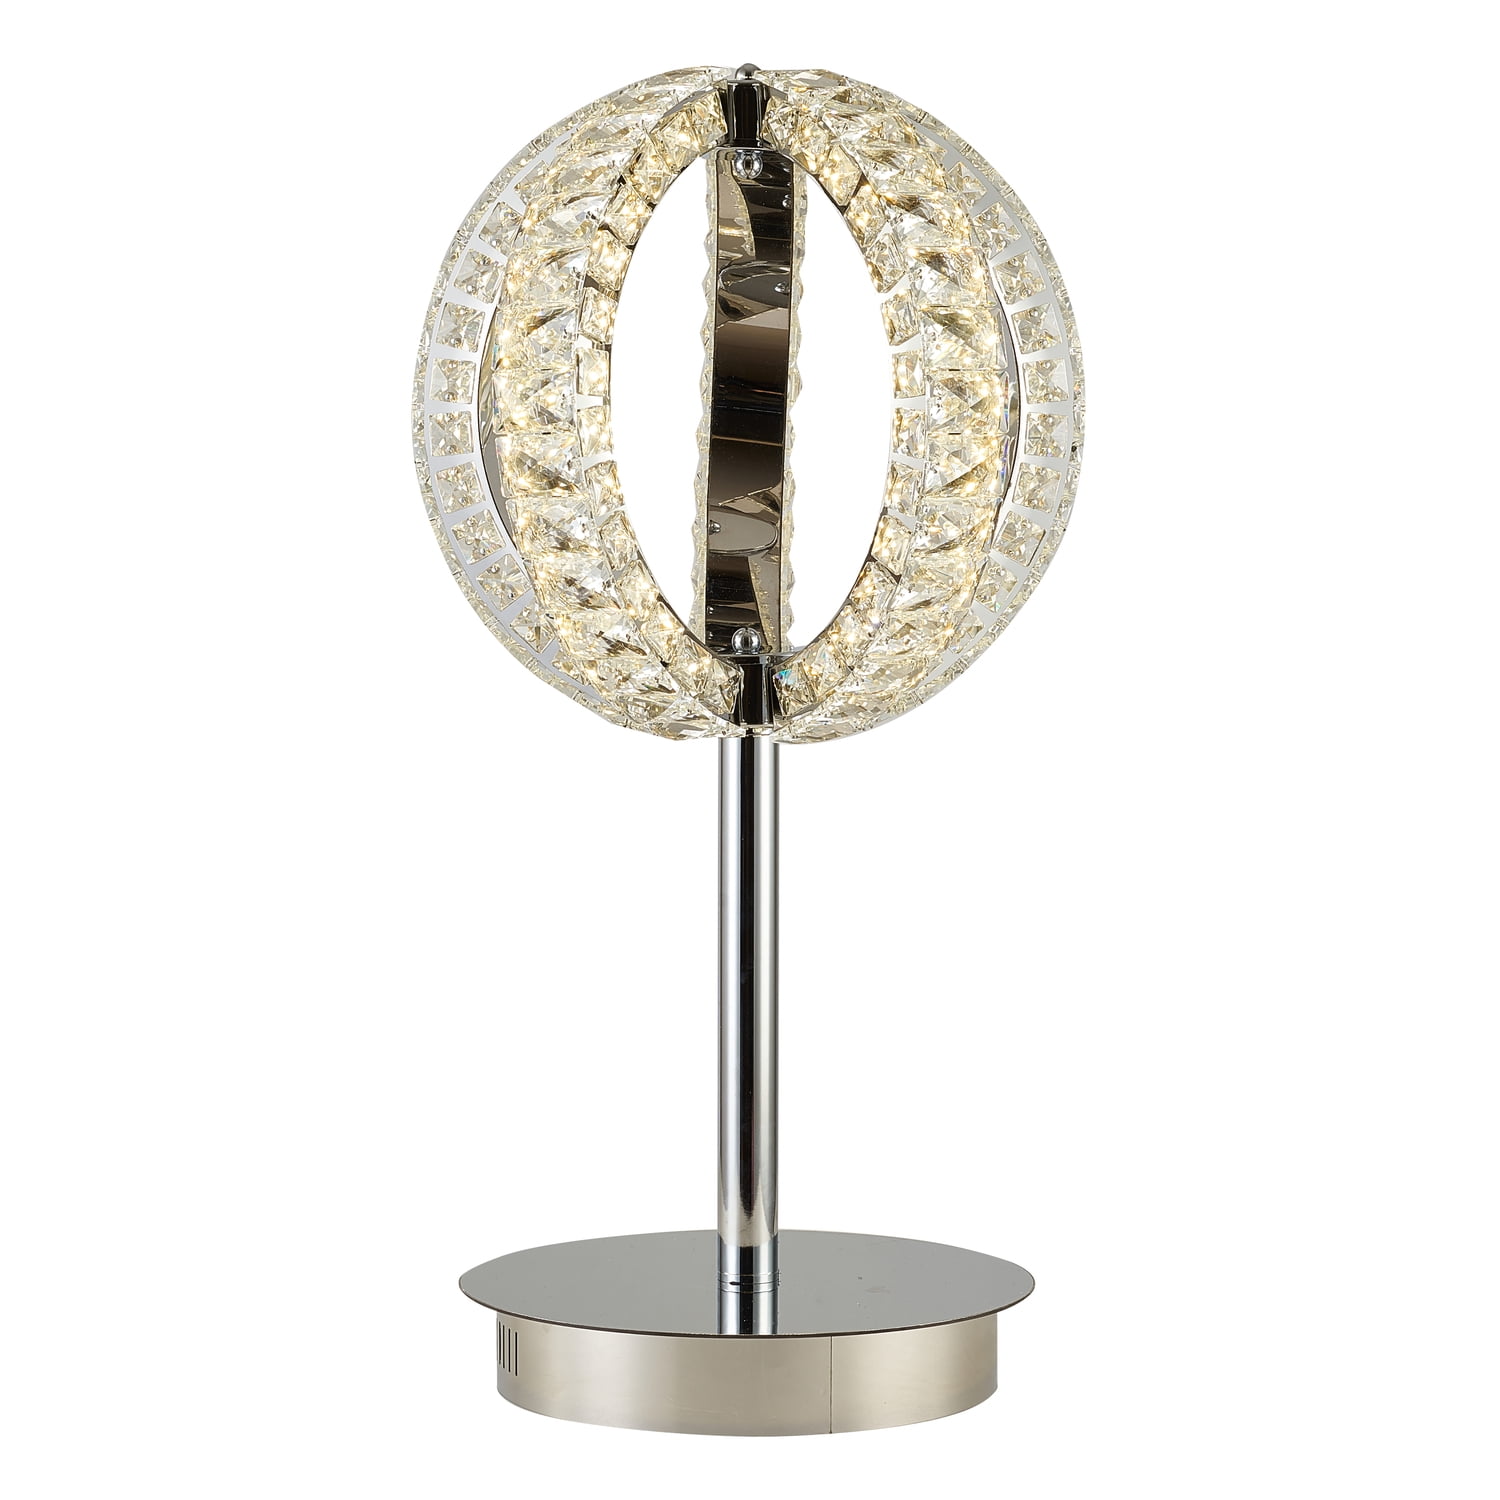 CHROME BASE LAMP FINIAL-ORB CRYSTAL LAMP FINIAL WITH POL 